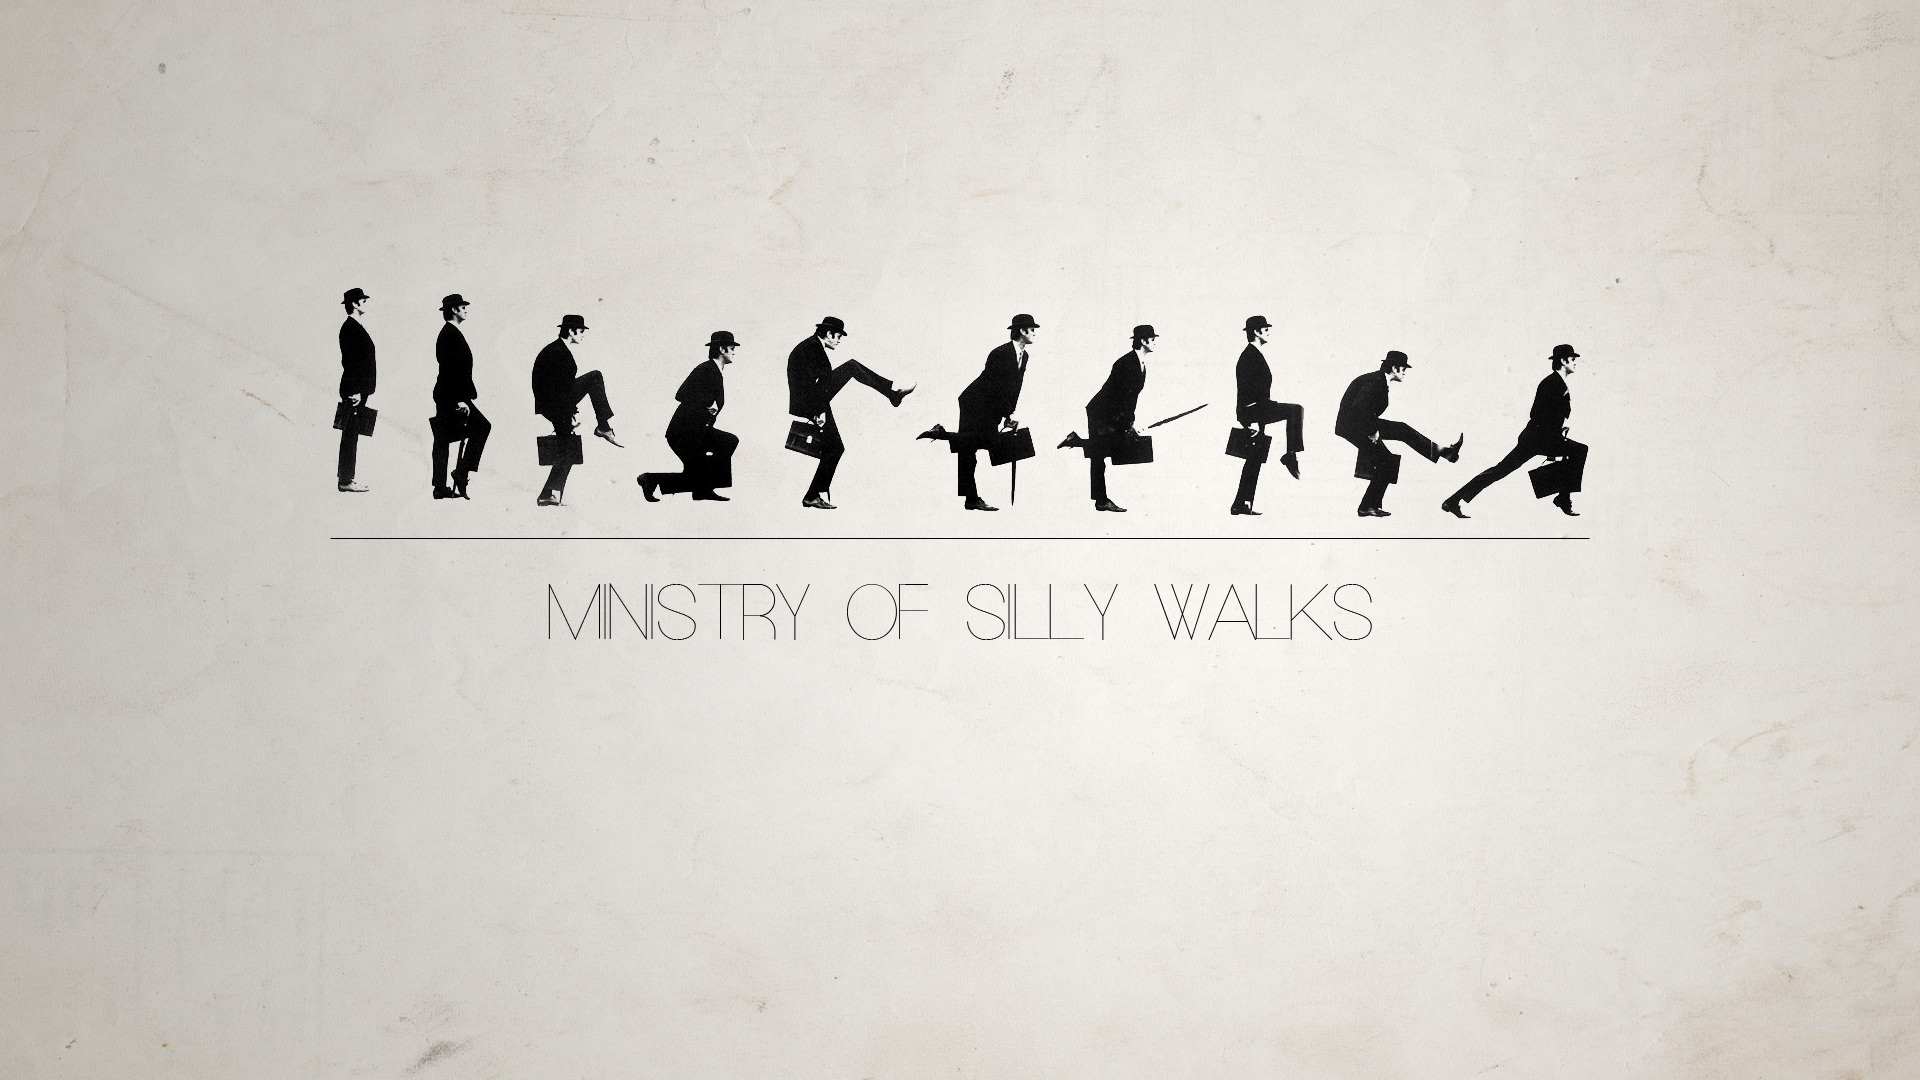 Minisrty of silly walks Monty Python movies wallpapers and images